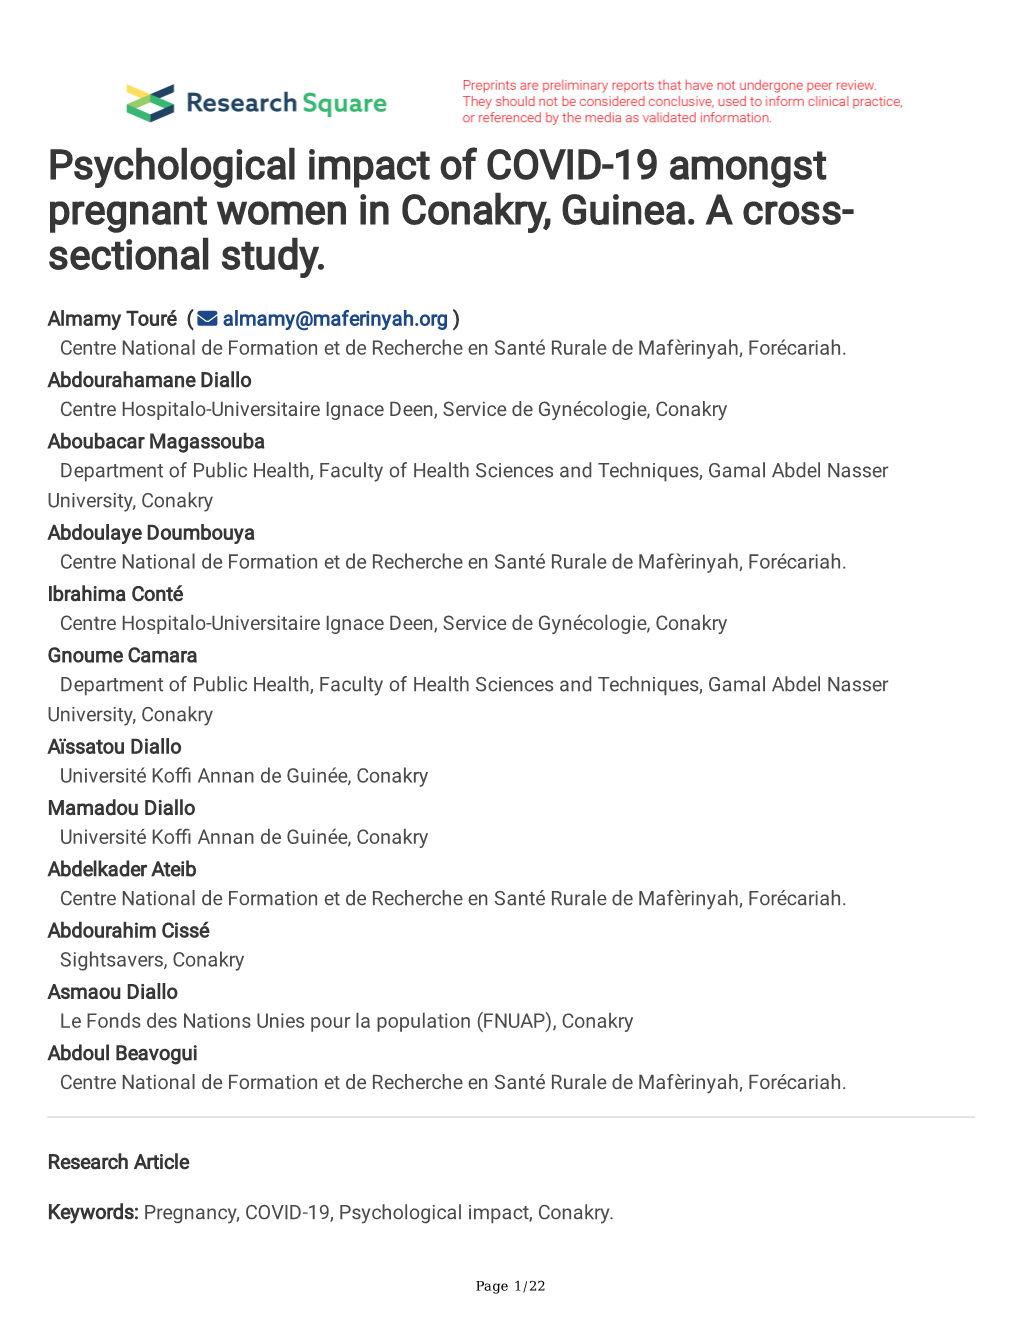 Psychological Impact of COVID-19 Amongst Pregnant Women in Conakry, Guinea